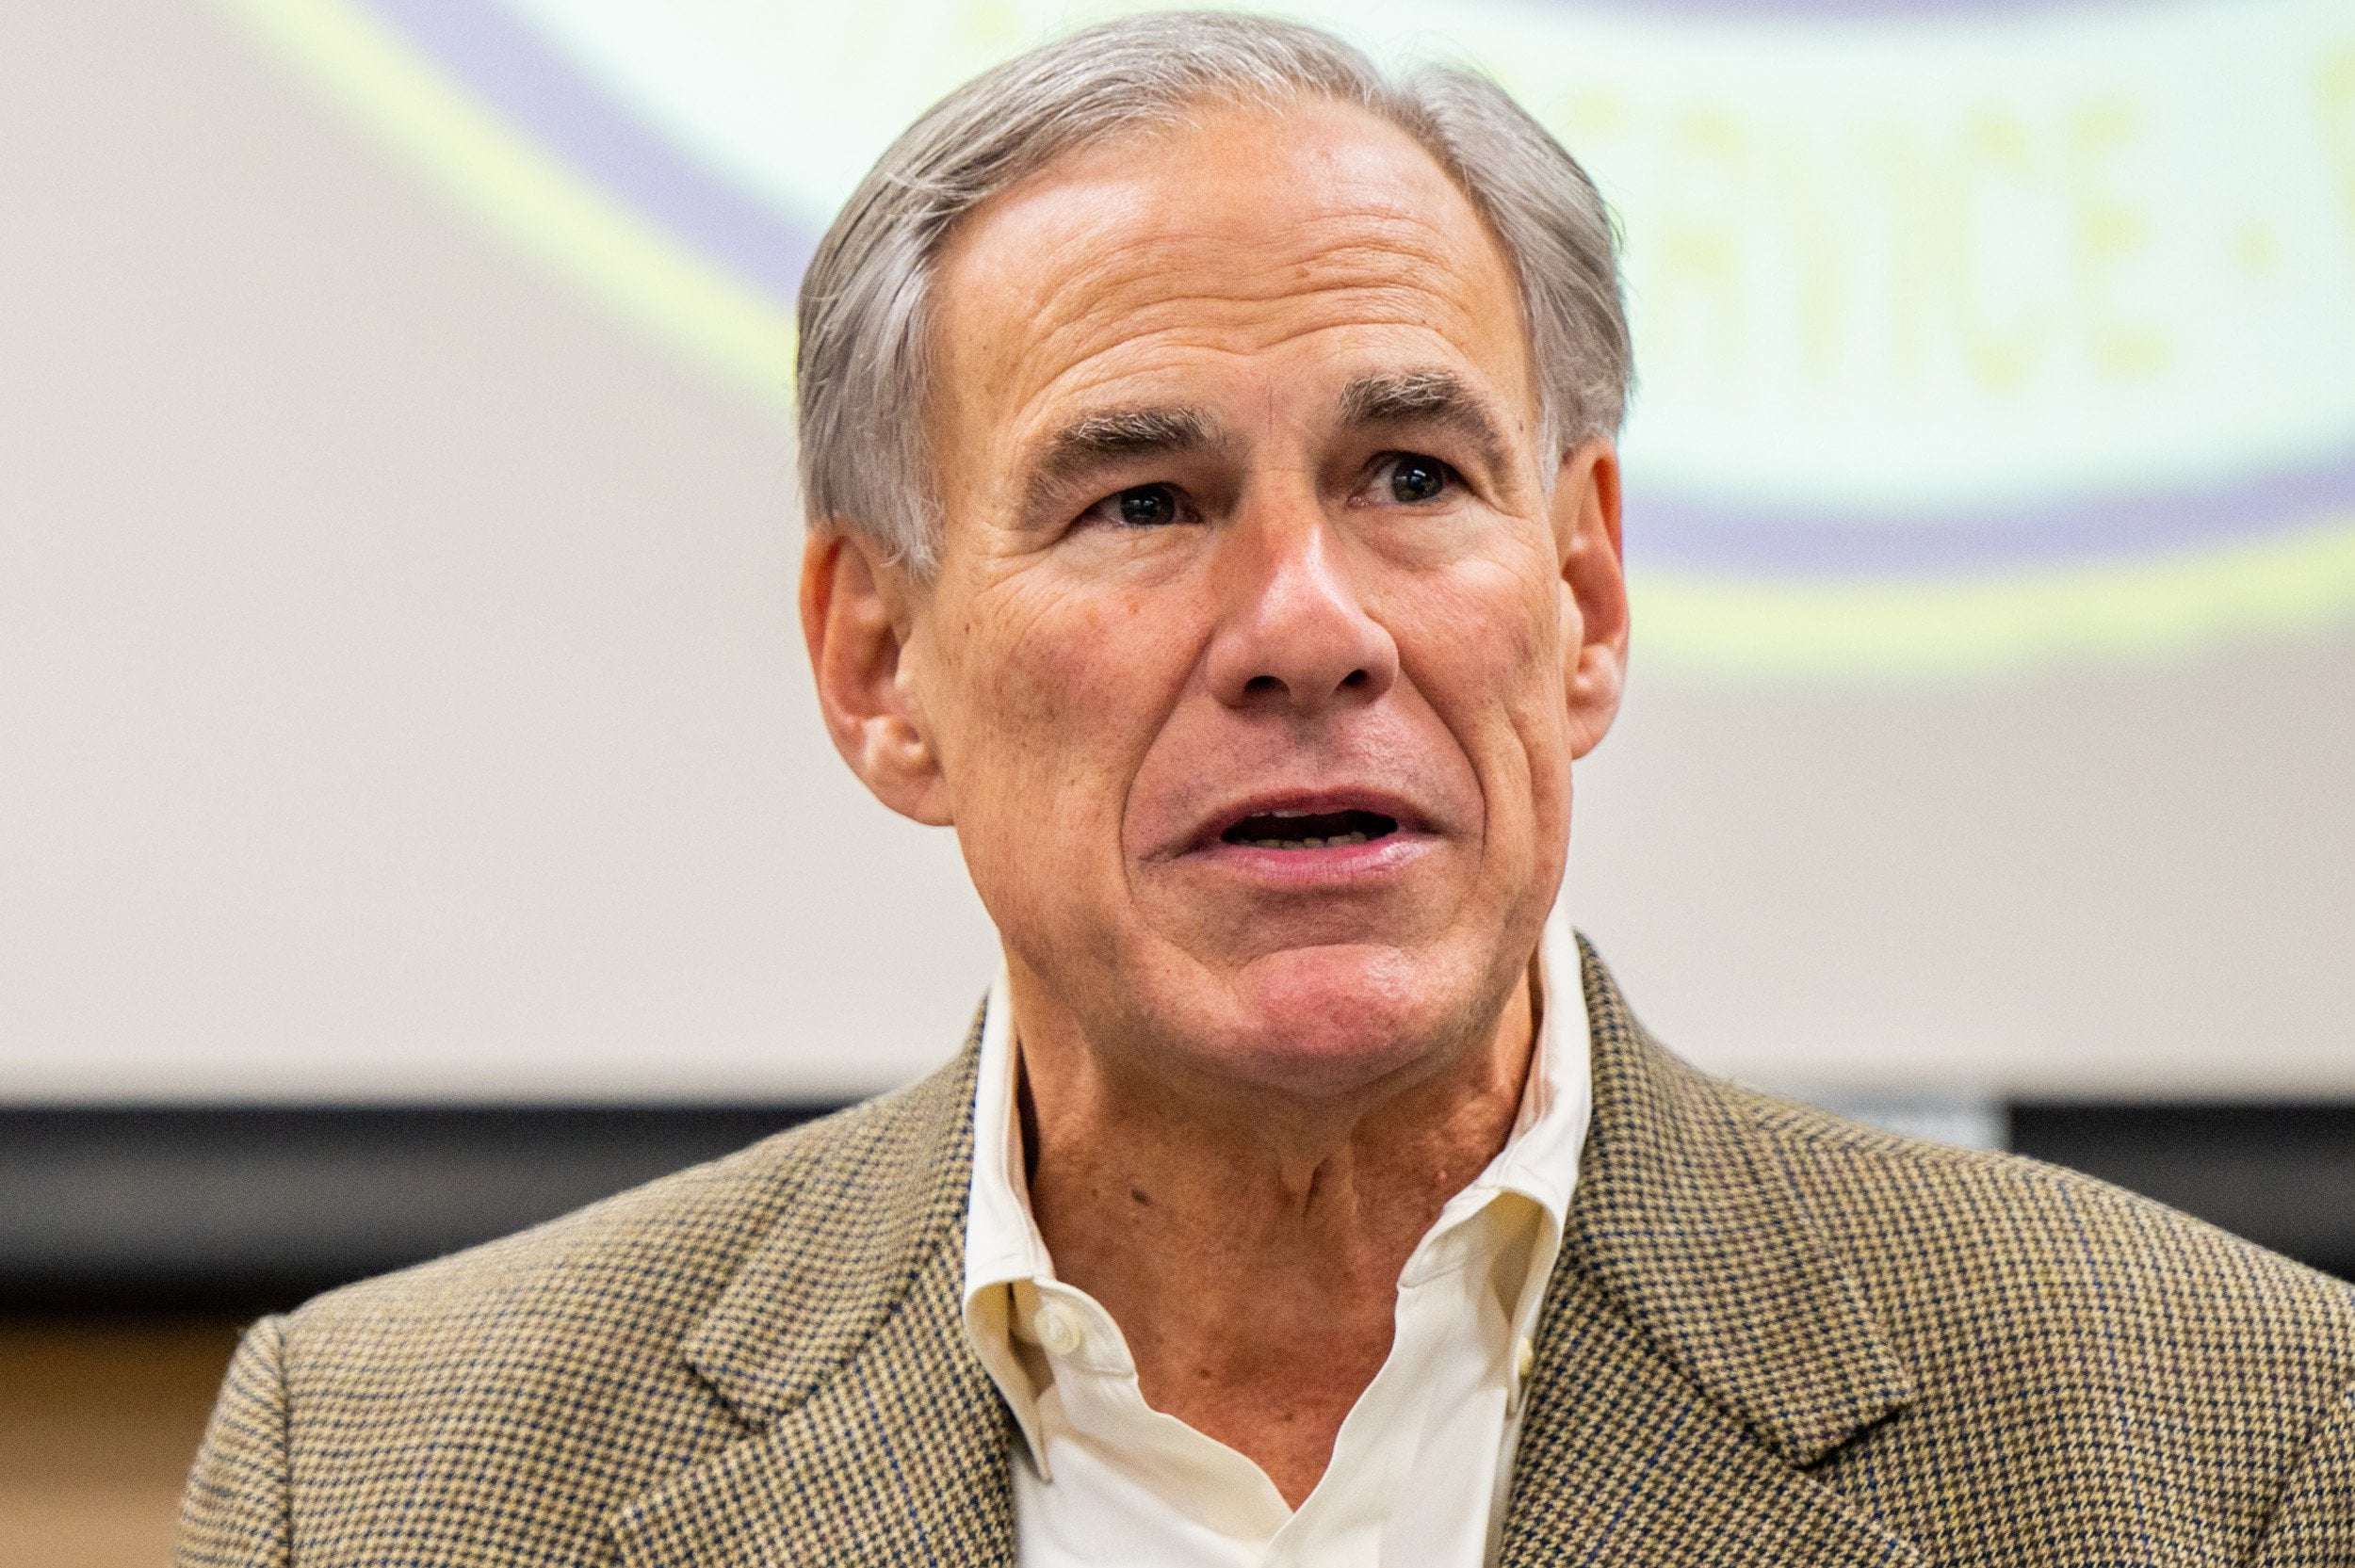 image for Greg Abbott Criticized for Response to Texas Shooting: 'A New Low'